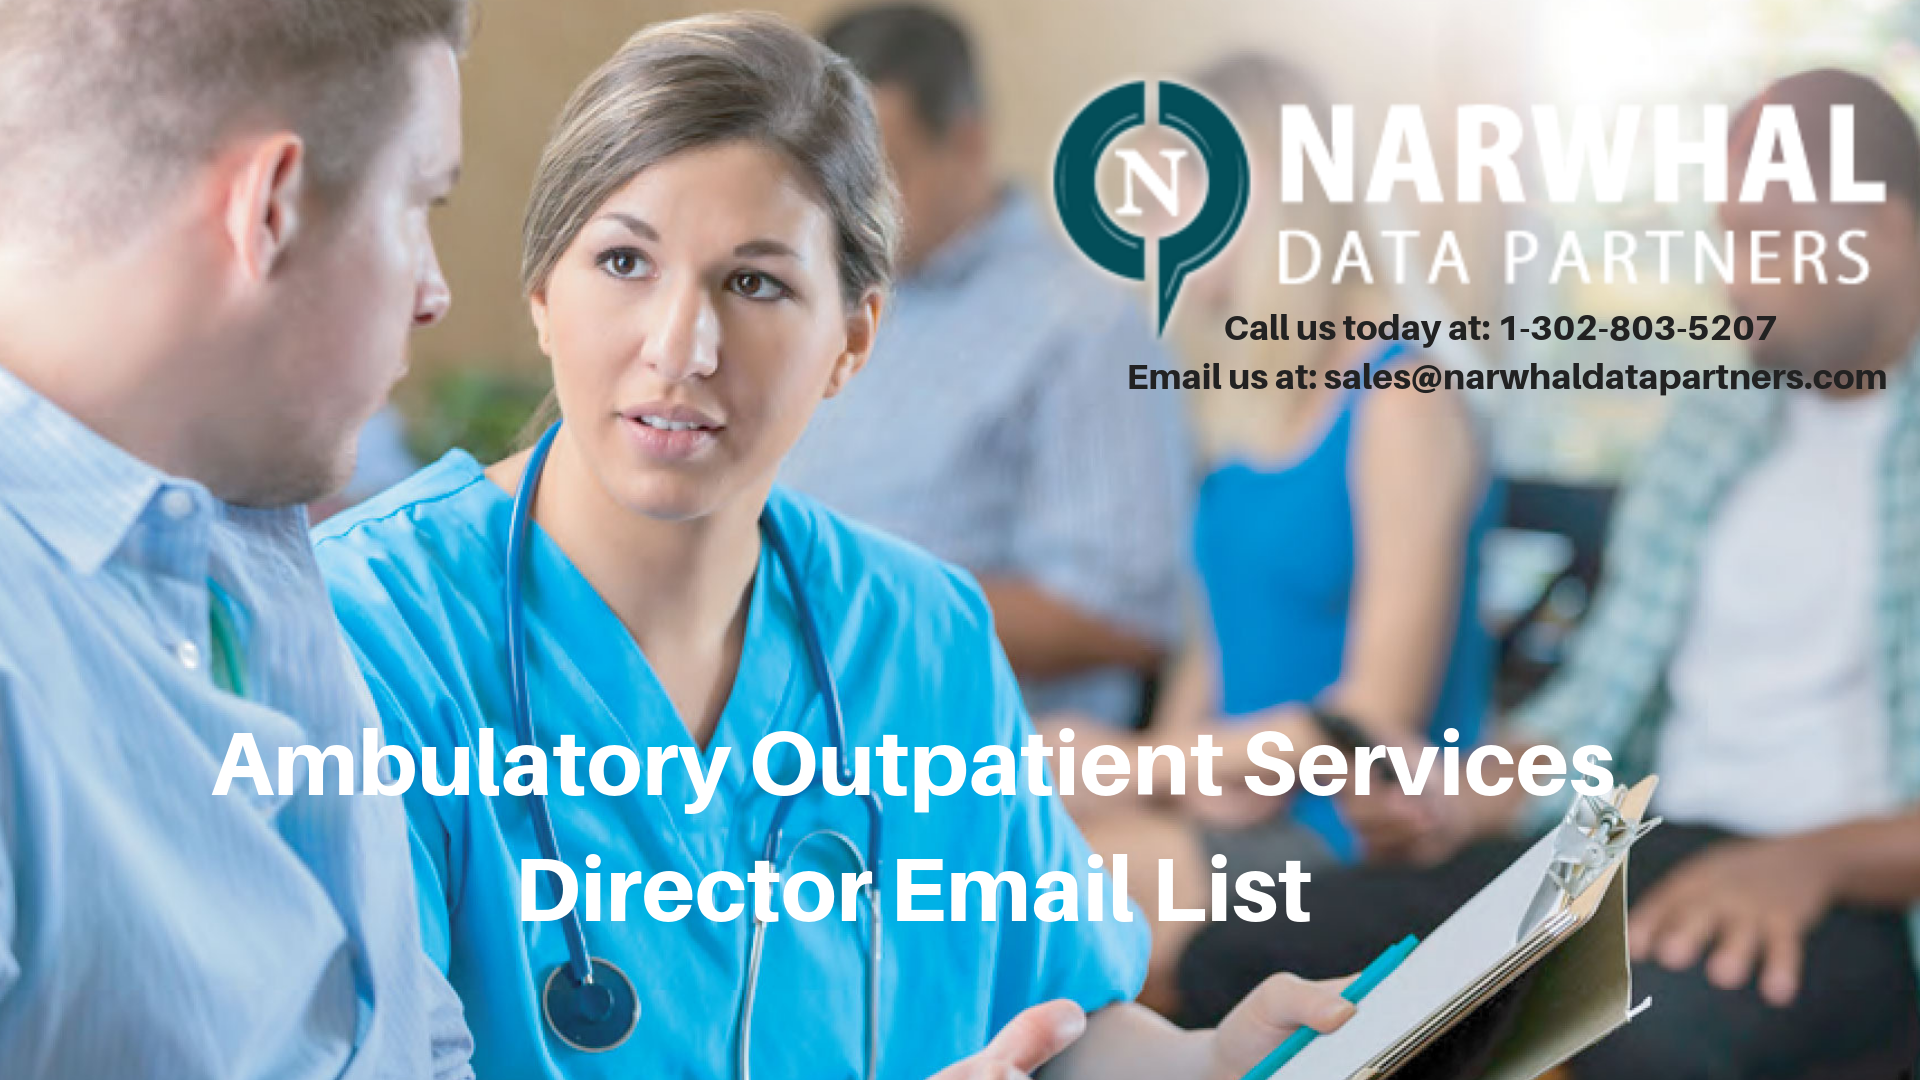 http://narwhaldatapartners.com/ambulatory-outpatient-services-director-email-list.html